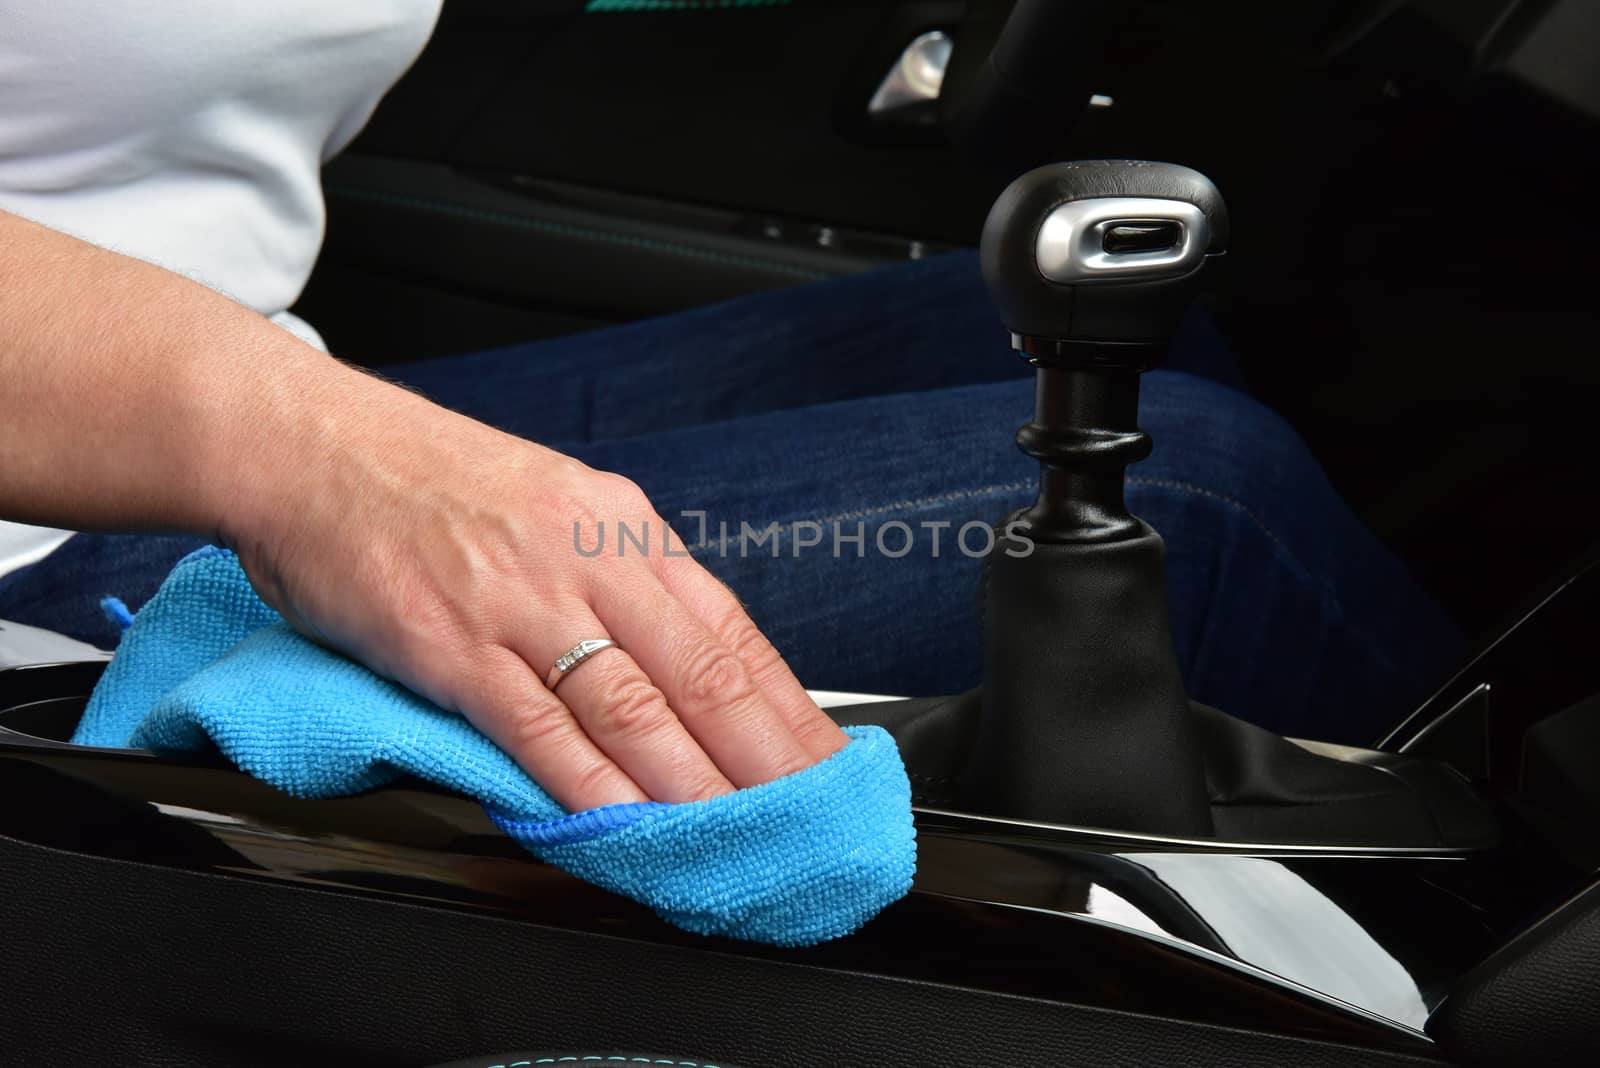 Cleaning the car console with a microfiber cloth by aselsa